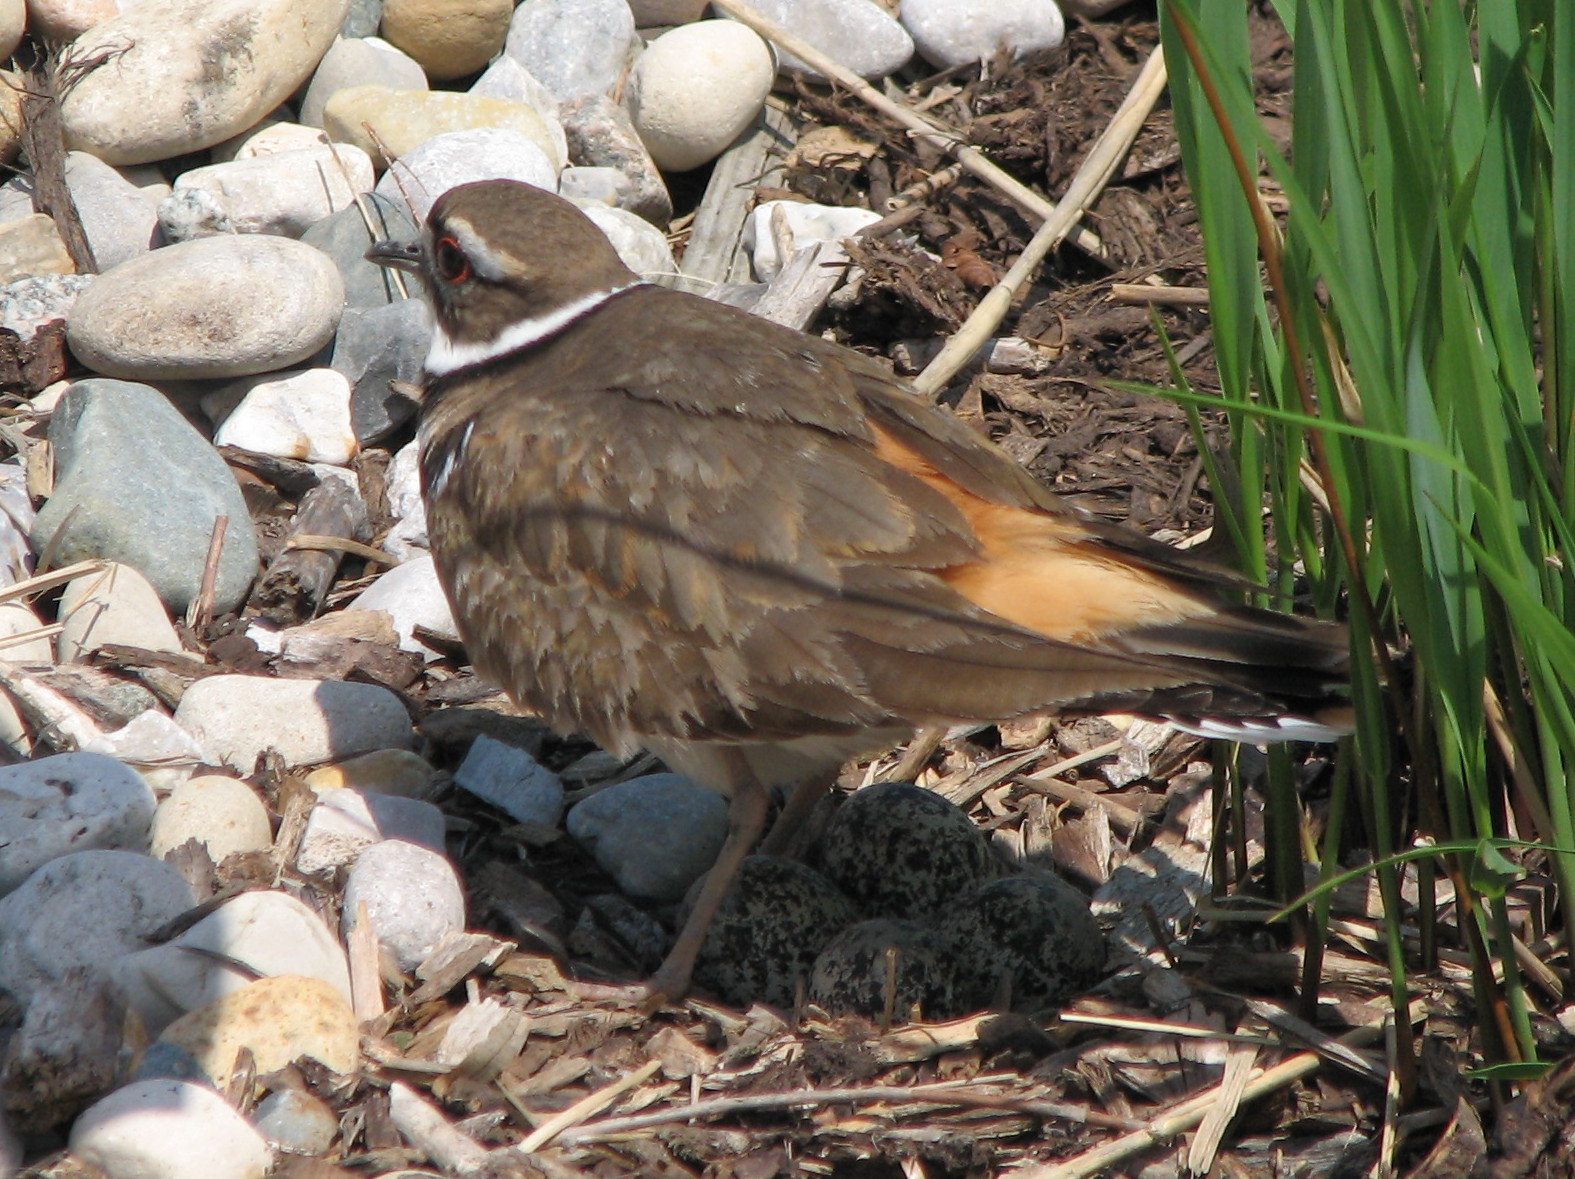 a close up of a bird on the ground by some rocks